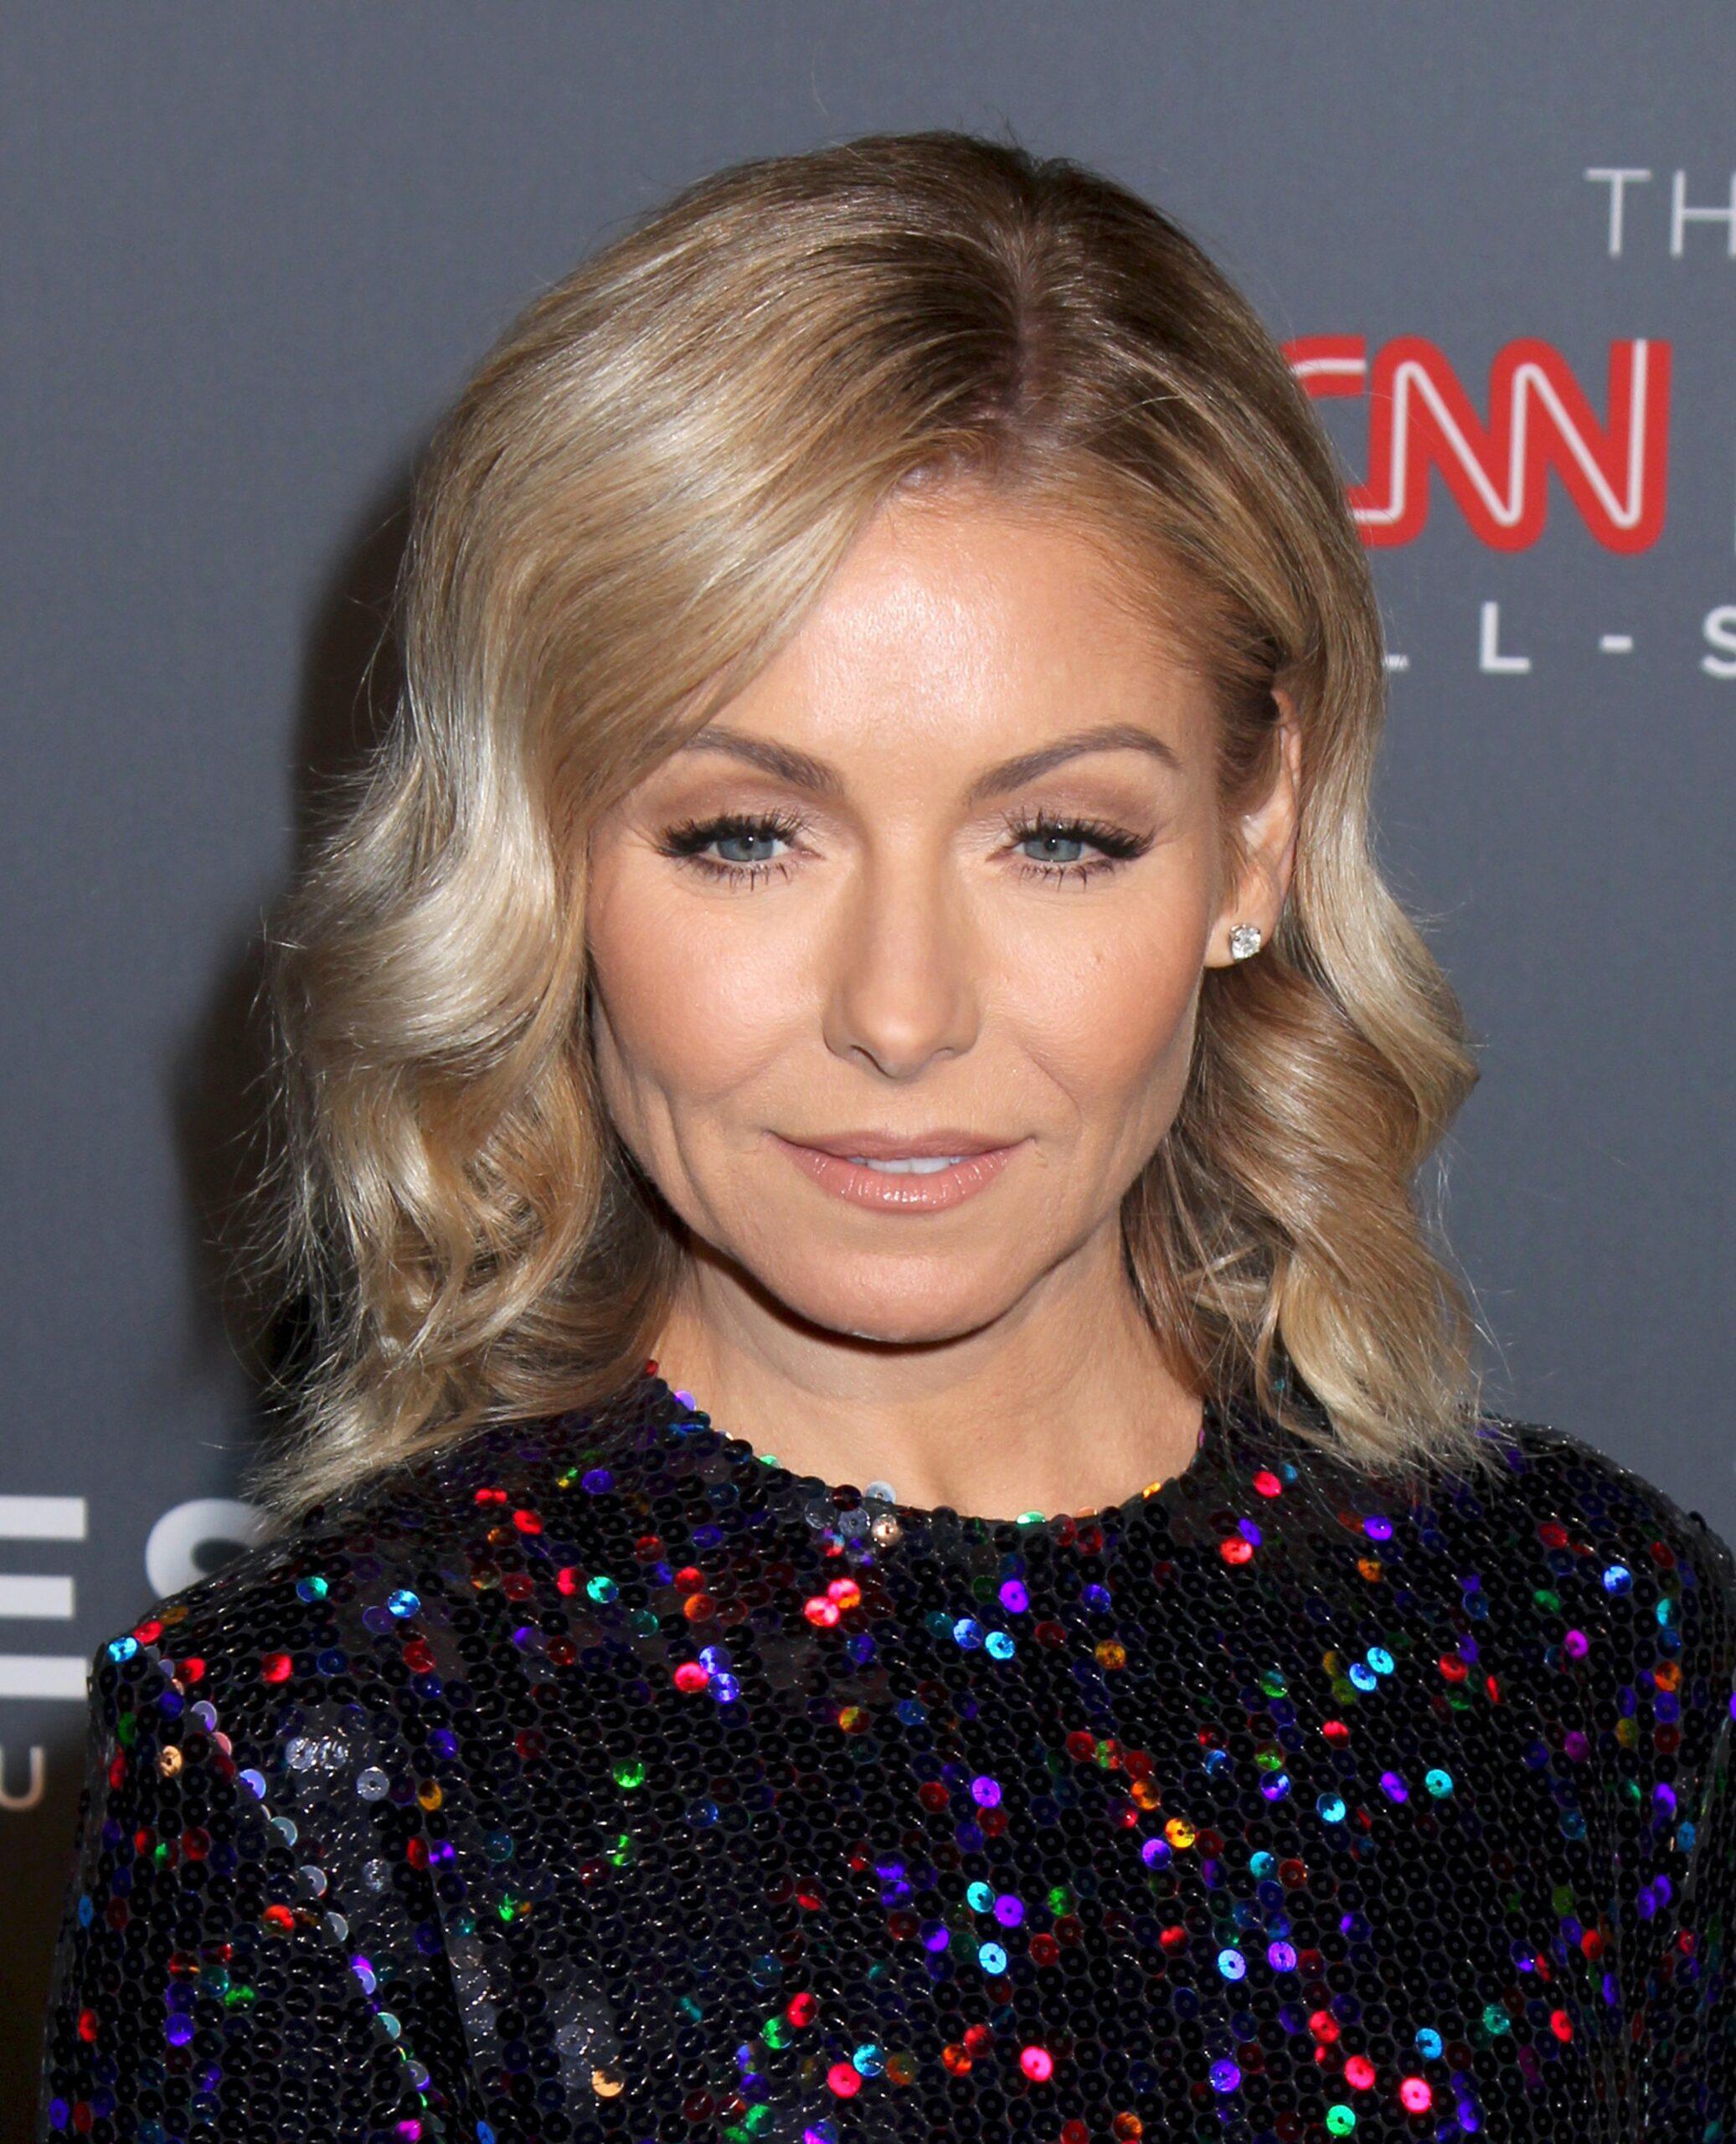 Kelly Ripa 10th annual CNN Heroes: An All-Star Tribute in New York City